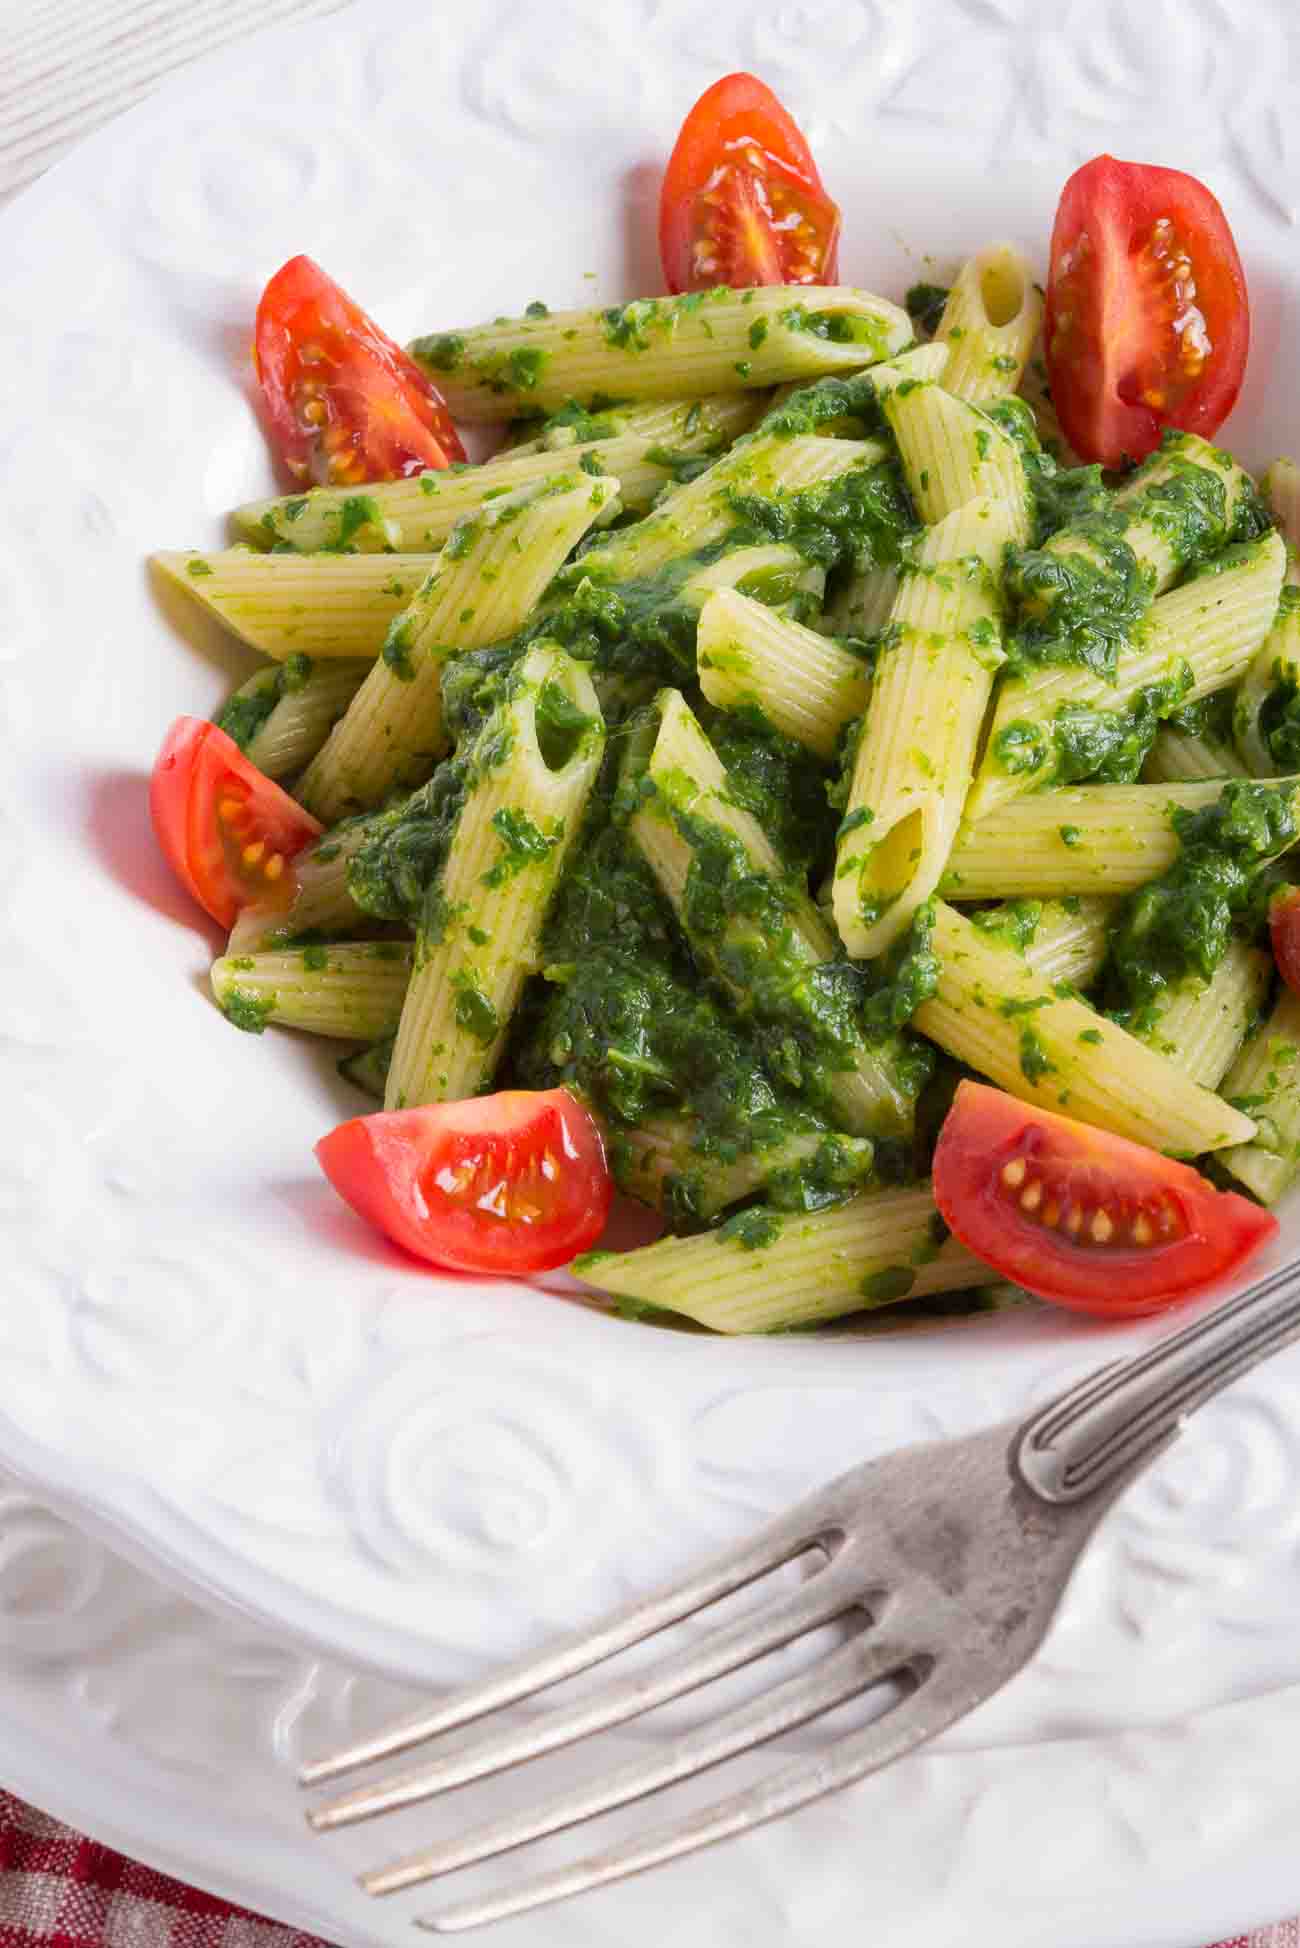 Penne Pasta Recipe in Spinach Basil Pesto Sauce by Archana&amp;#39;s Kitchen